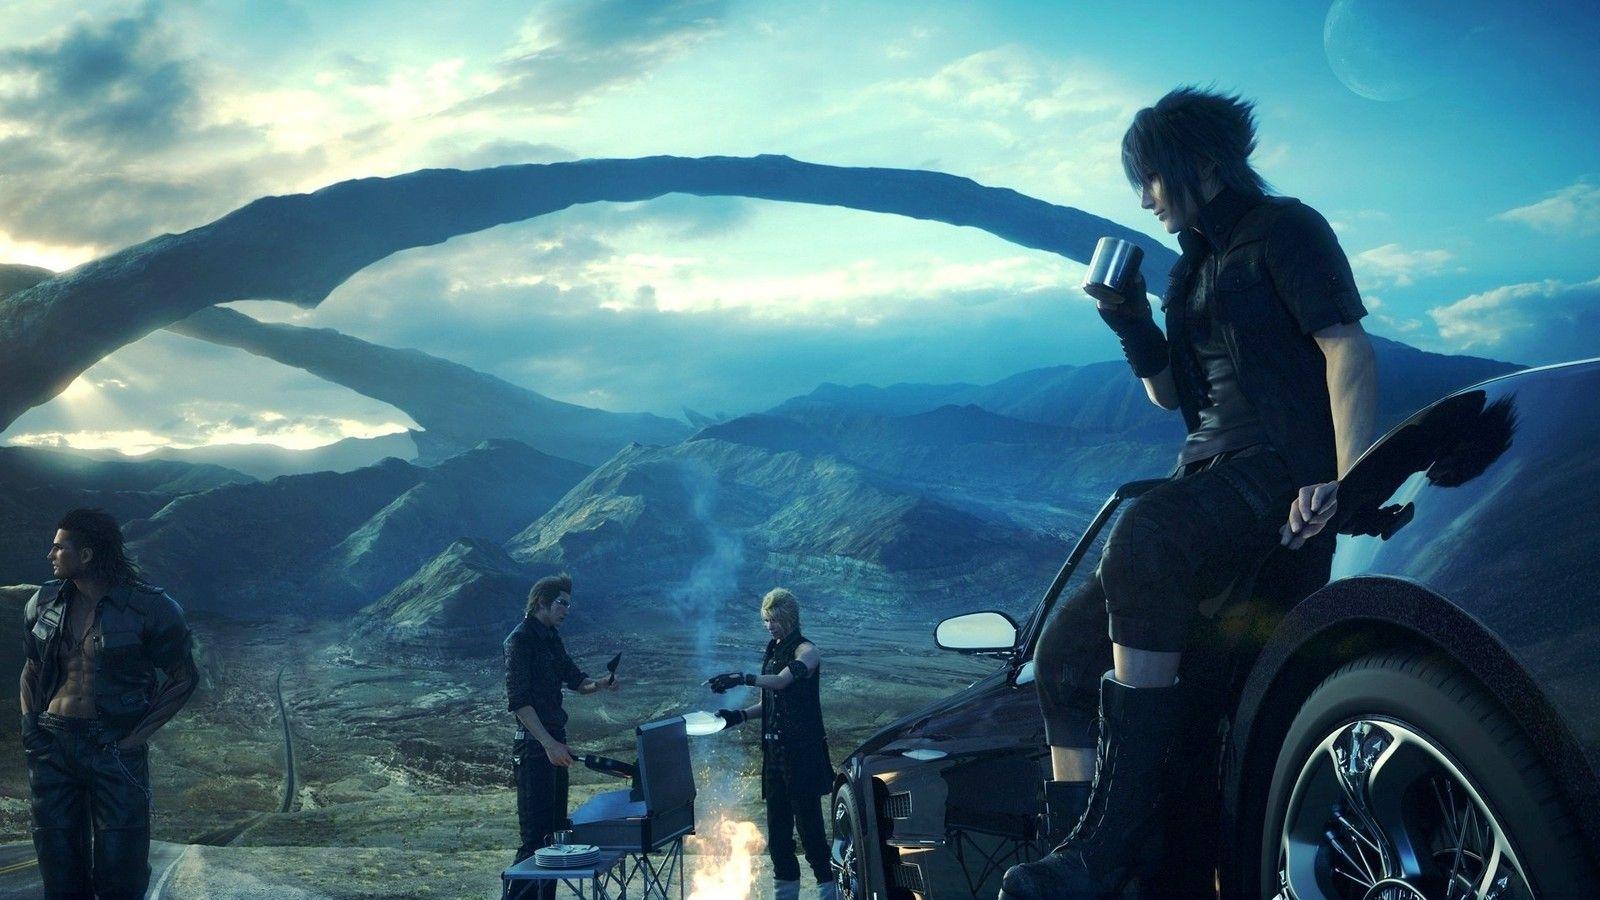 Final Fantasy XV Armiger Guide: Where to find and how to use the